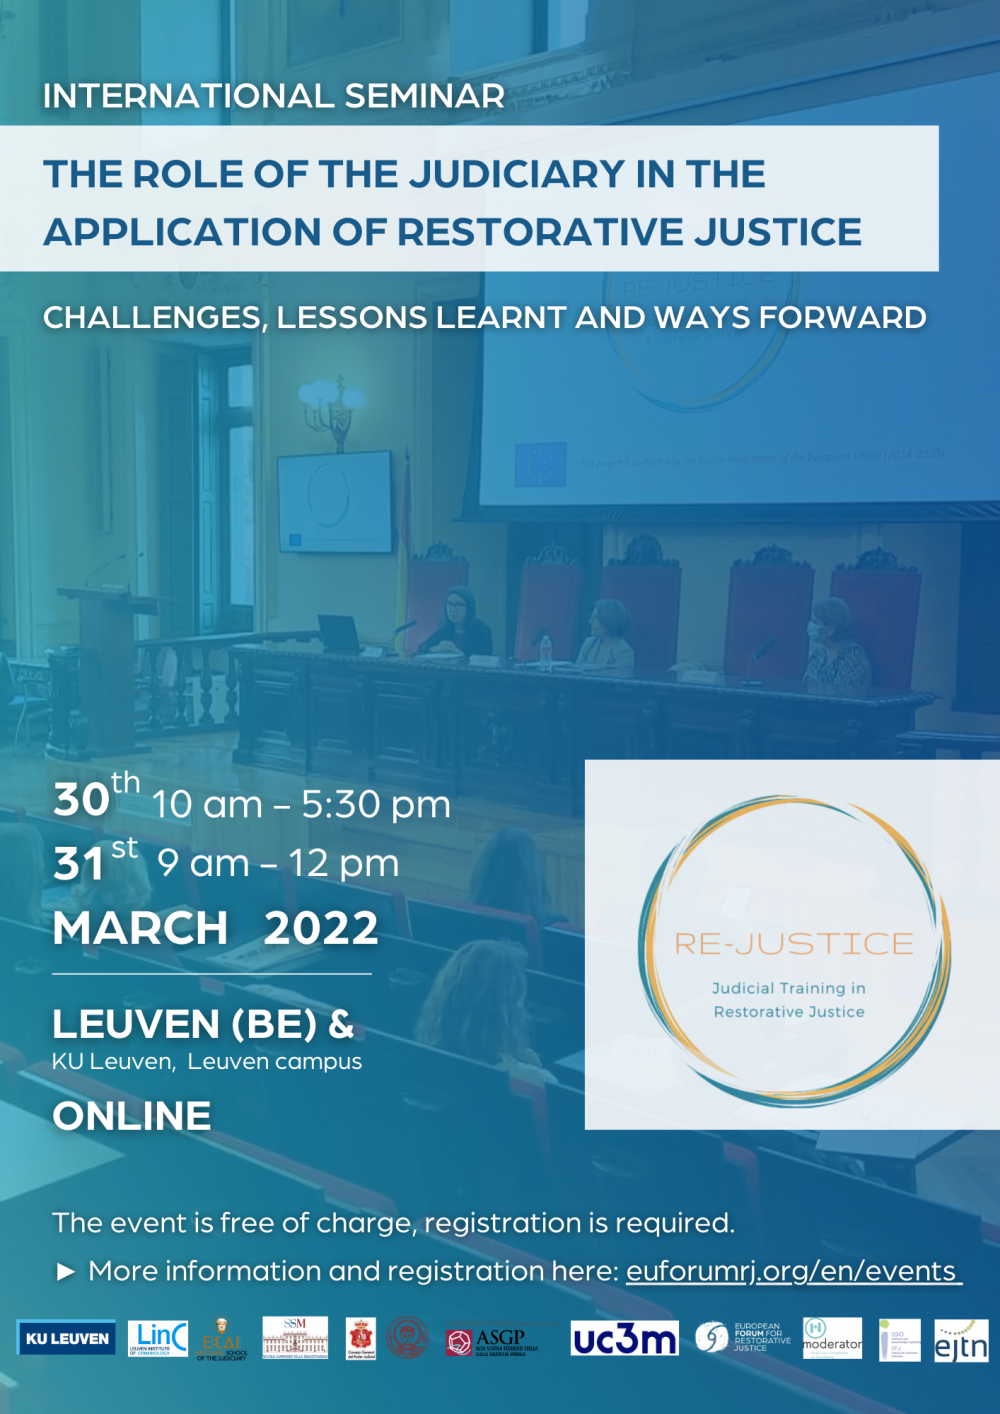 The flyer of the RE-JUSTICE closing seminar